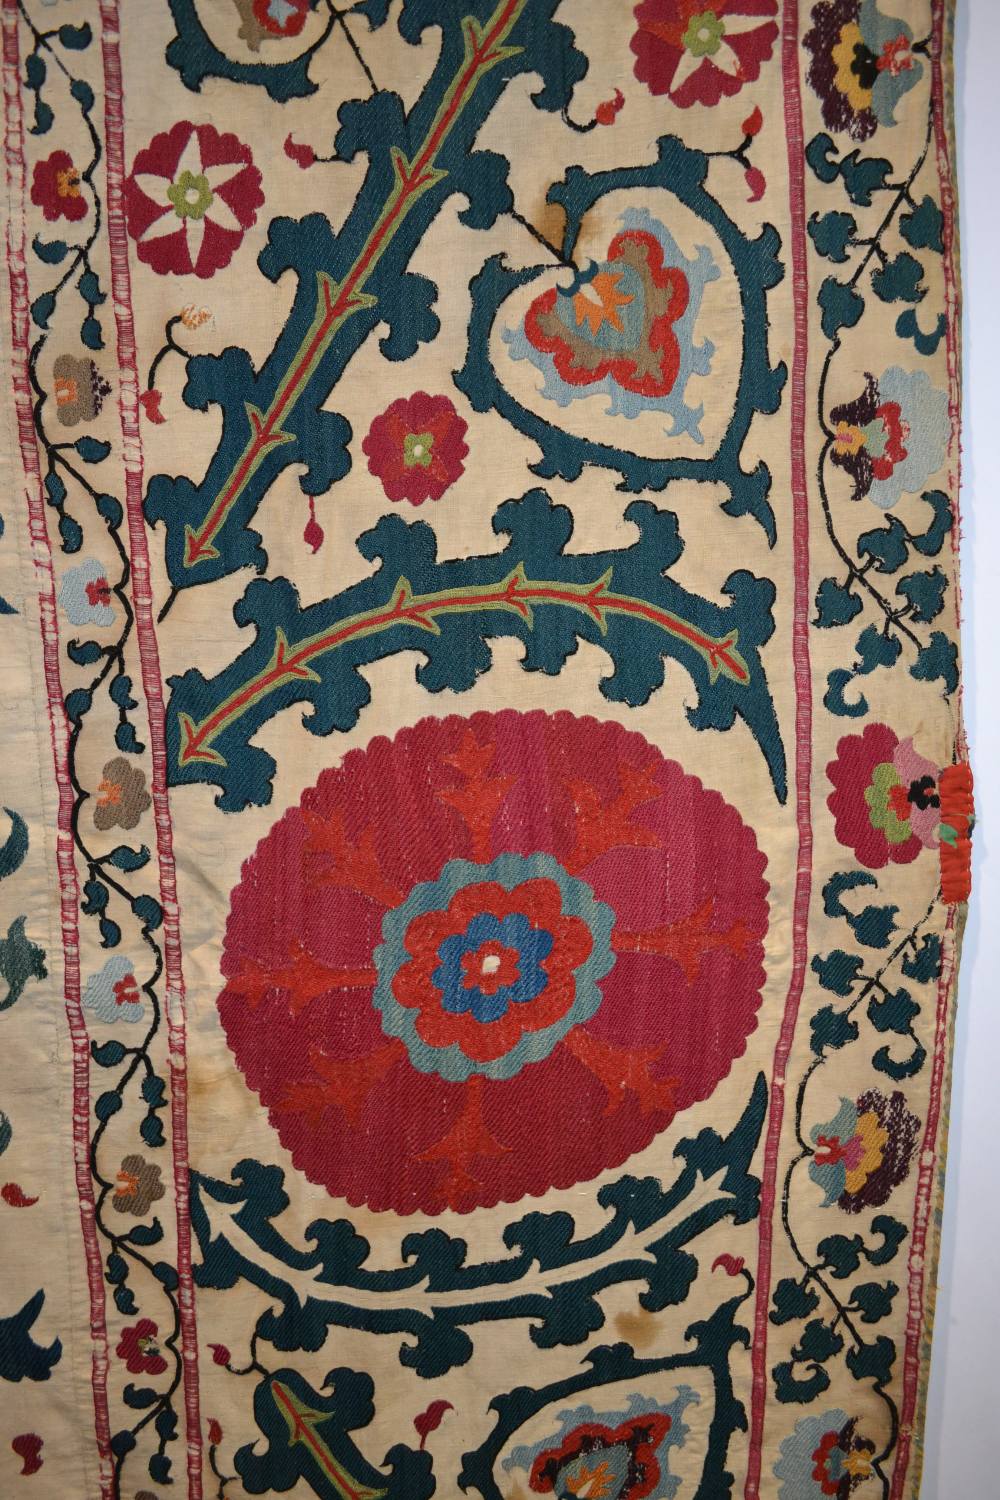 Attractive suzani, probably Bokhara, Uzbekistan, late 19th/early 20th century, cotton ground - Image 4 of 8